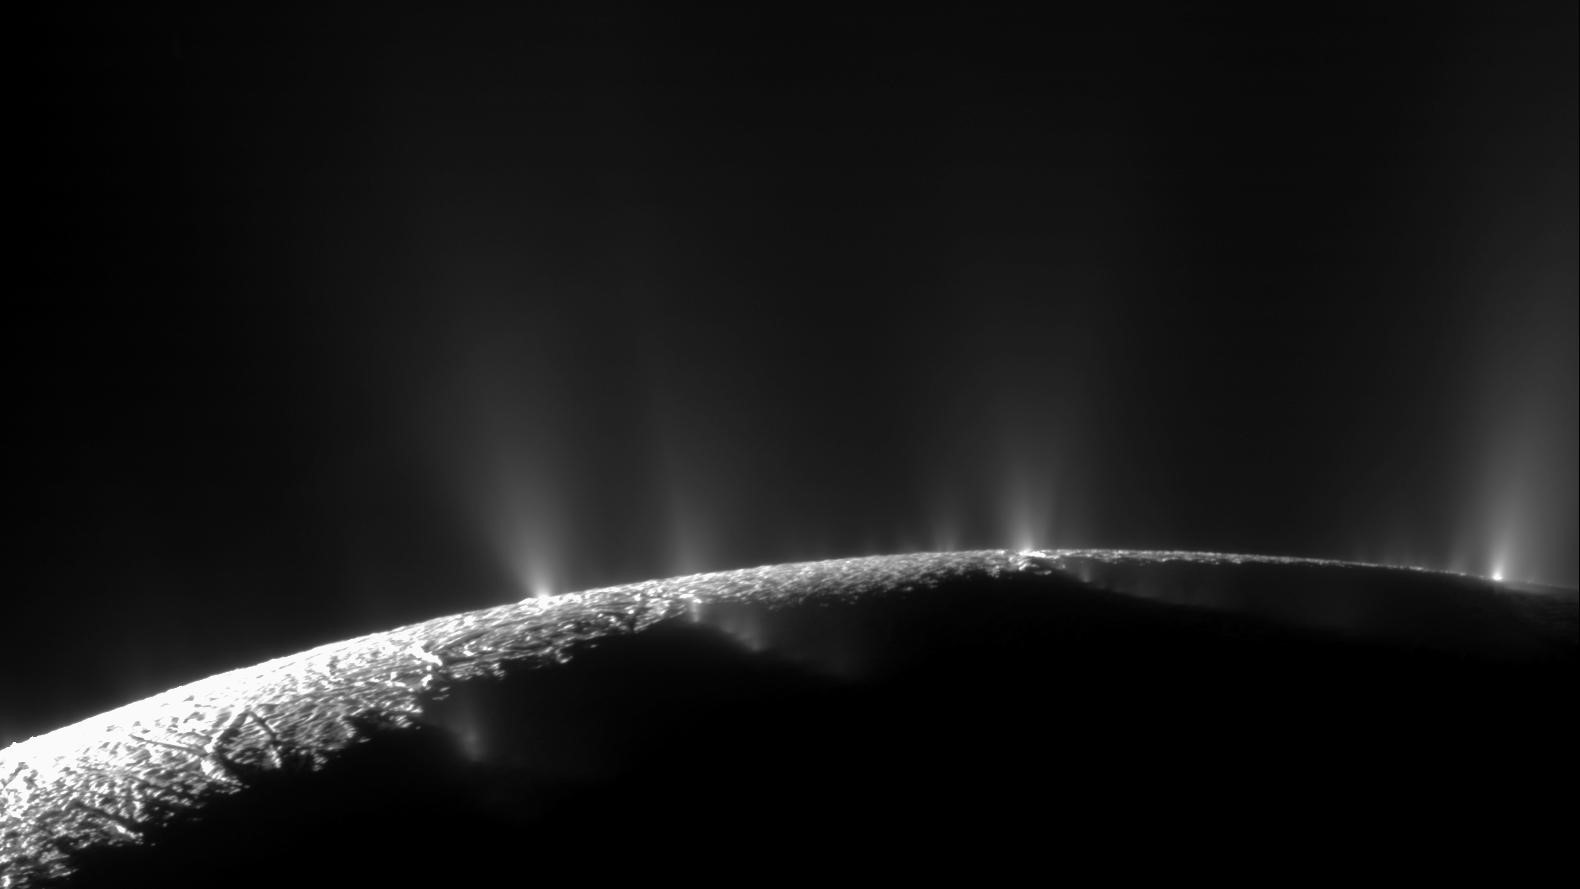 Scientists dream of flying through the plumes of Enceladus.